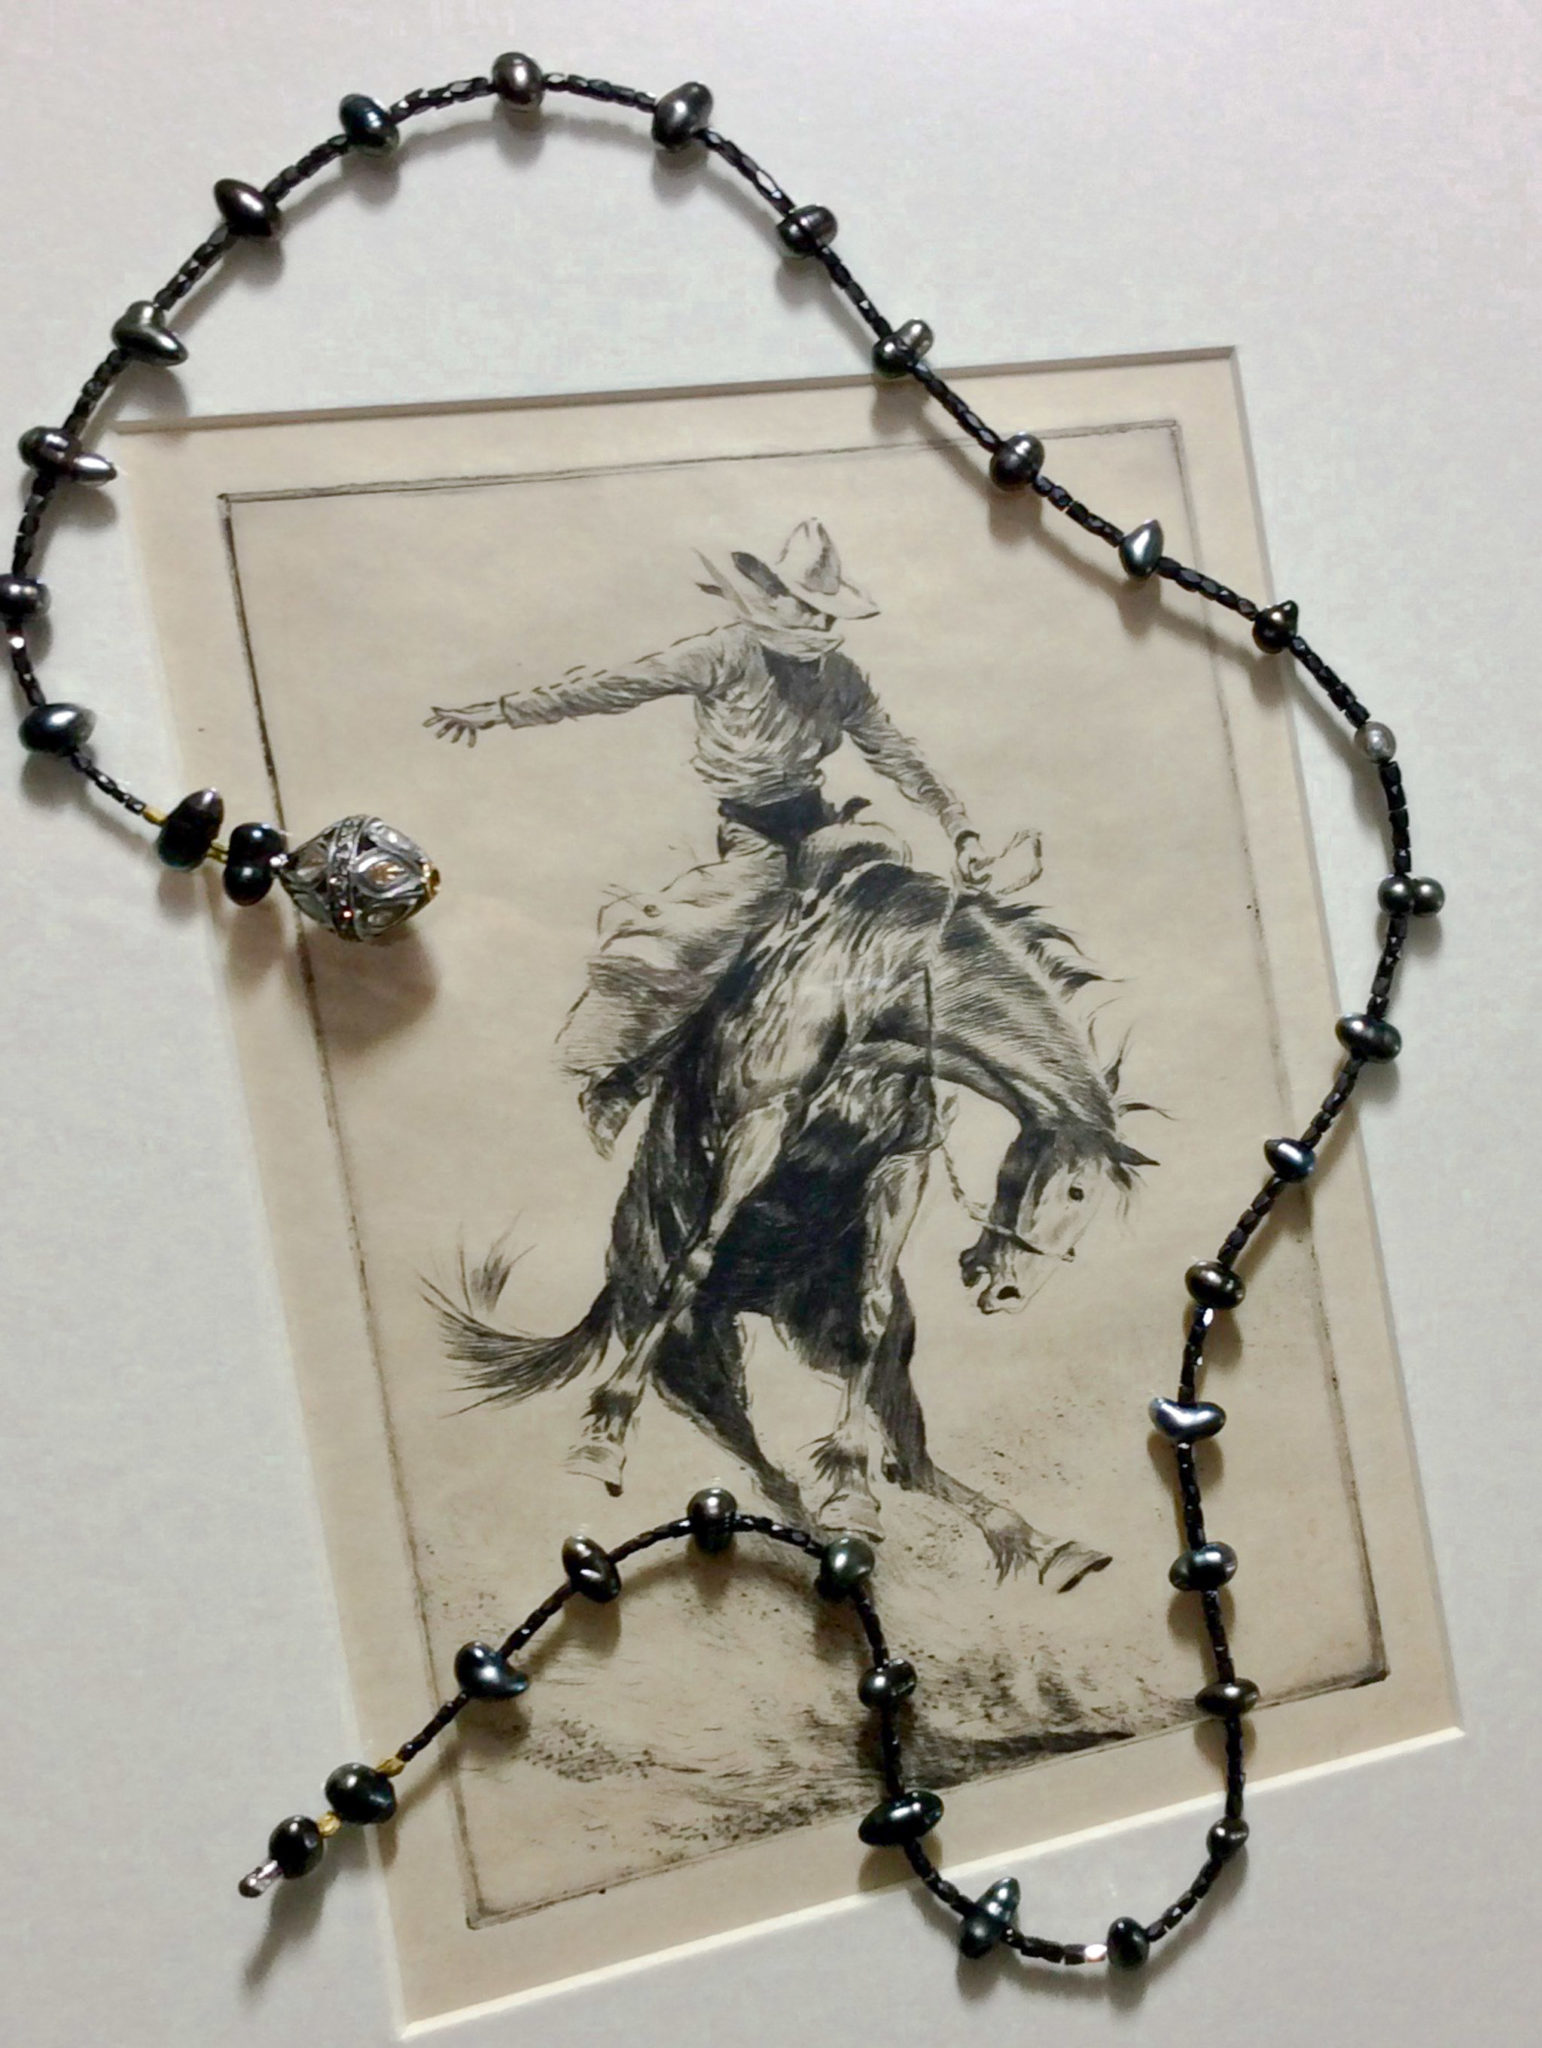 Black diamond and Tahitian pearl necklace shown on etching of a cowboy